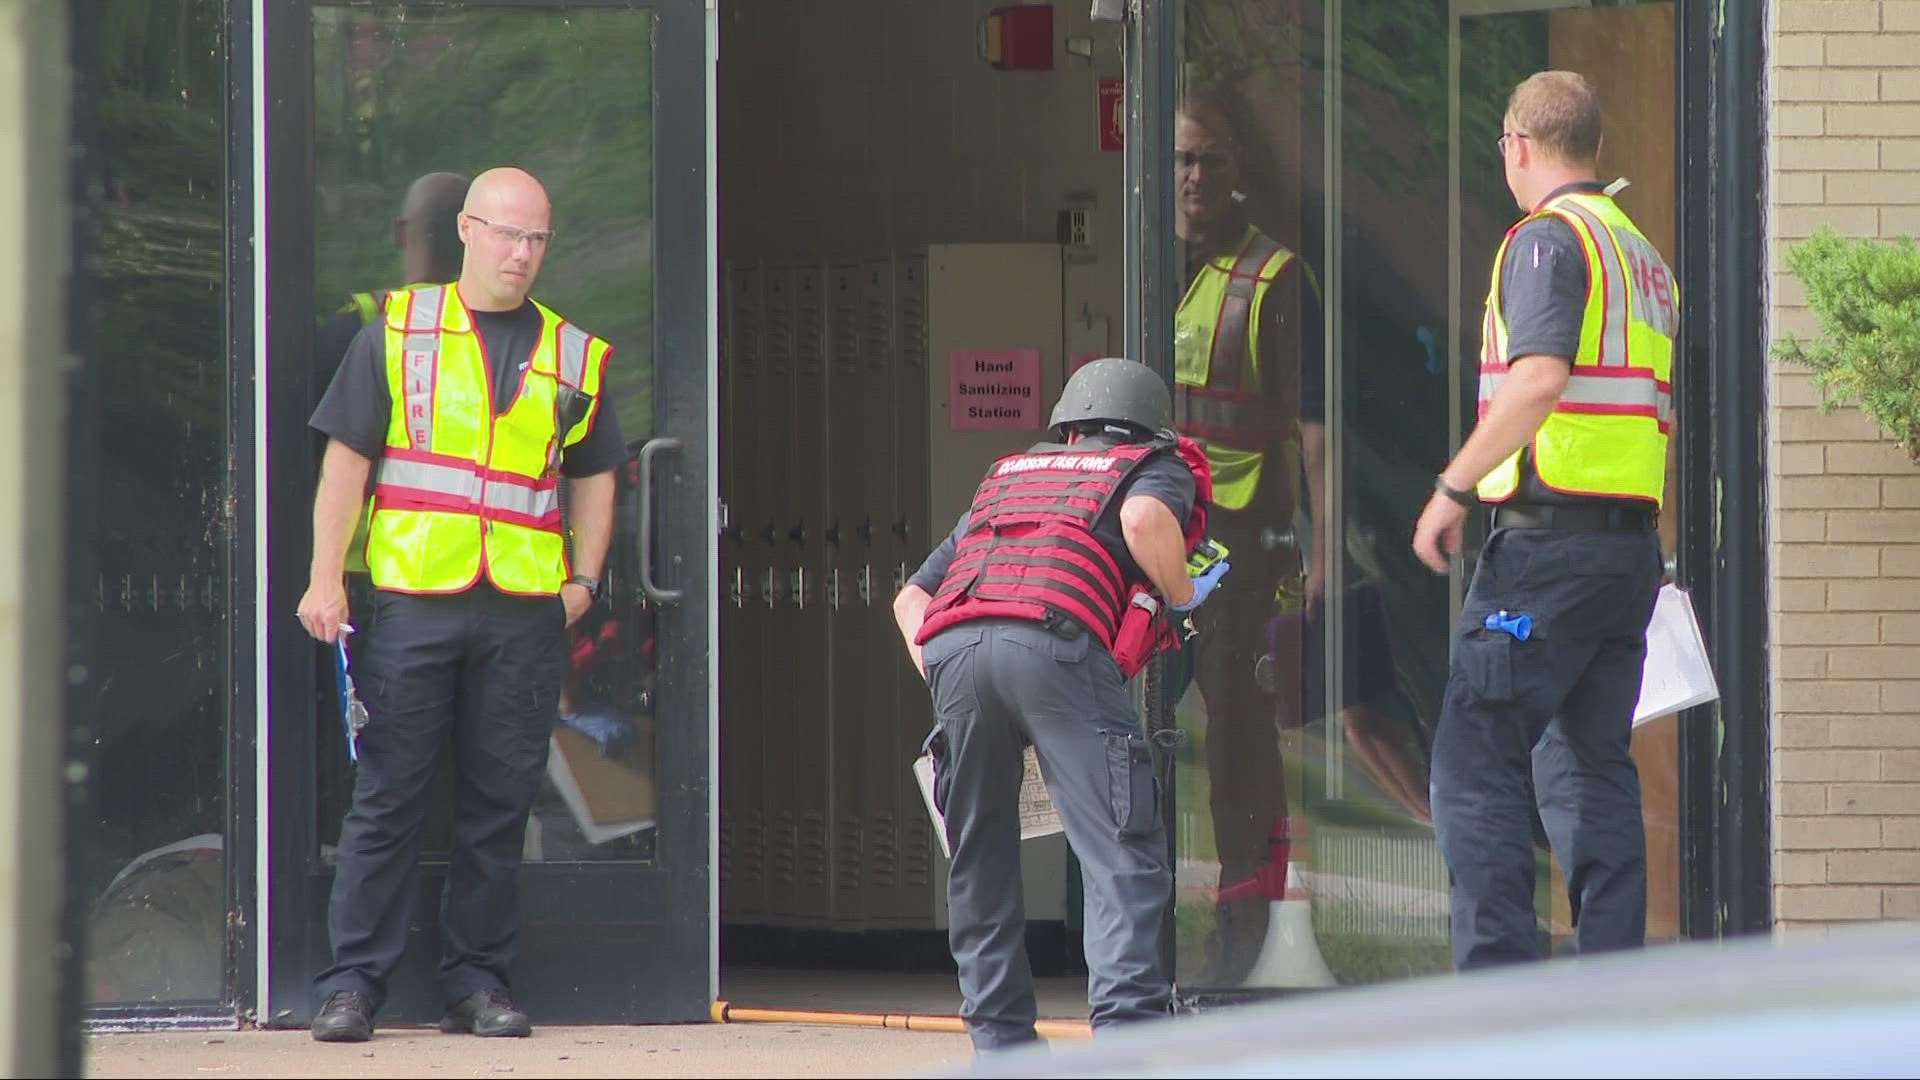 Officers rushed into a Westlake school during several training scenarios on Tuesday.